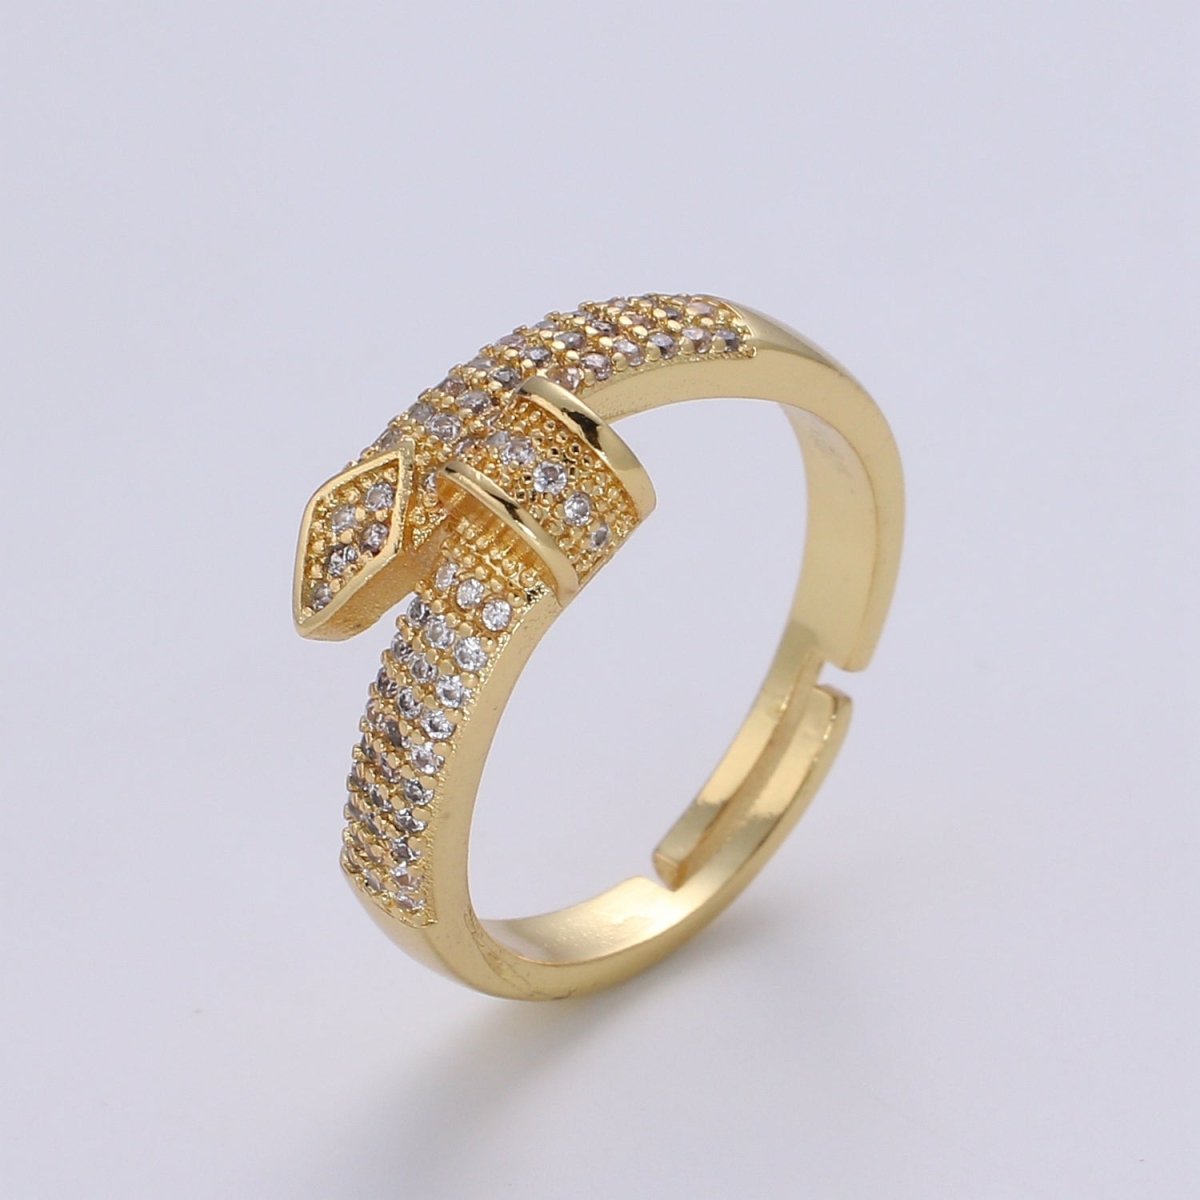 1pc CZ Pave Spiral 24K Ring, Diamond Cut Buckle Cubic Adjustable Gold Curb Ring, Simple Overlap Ring, Clear Cubic Zirconia R537 - DLUXCA